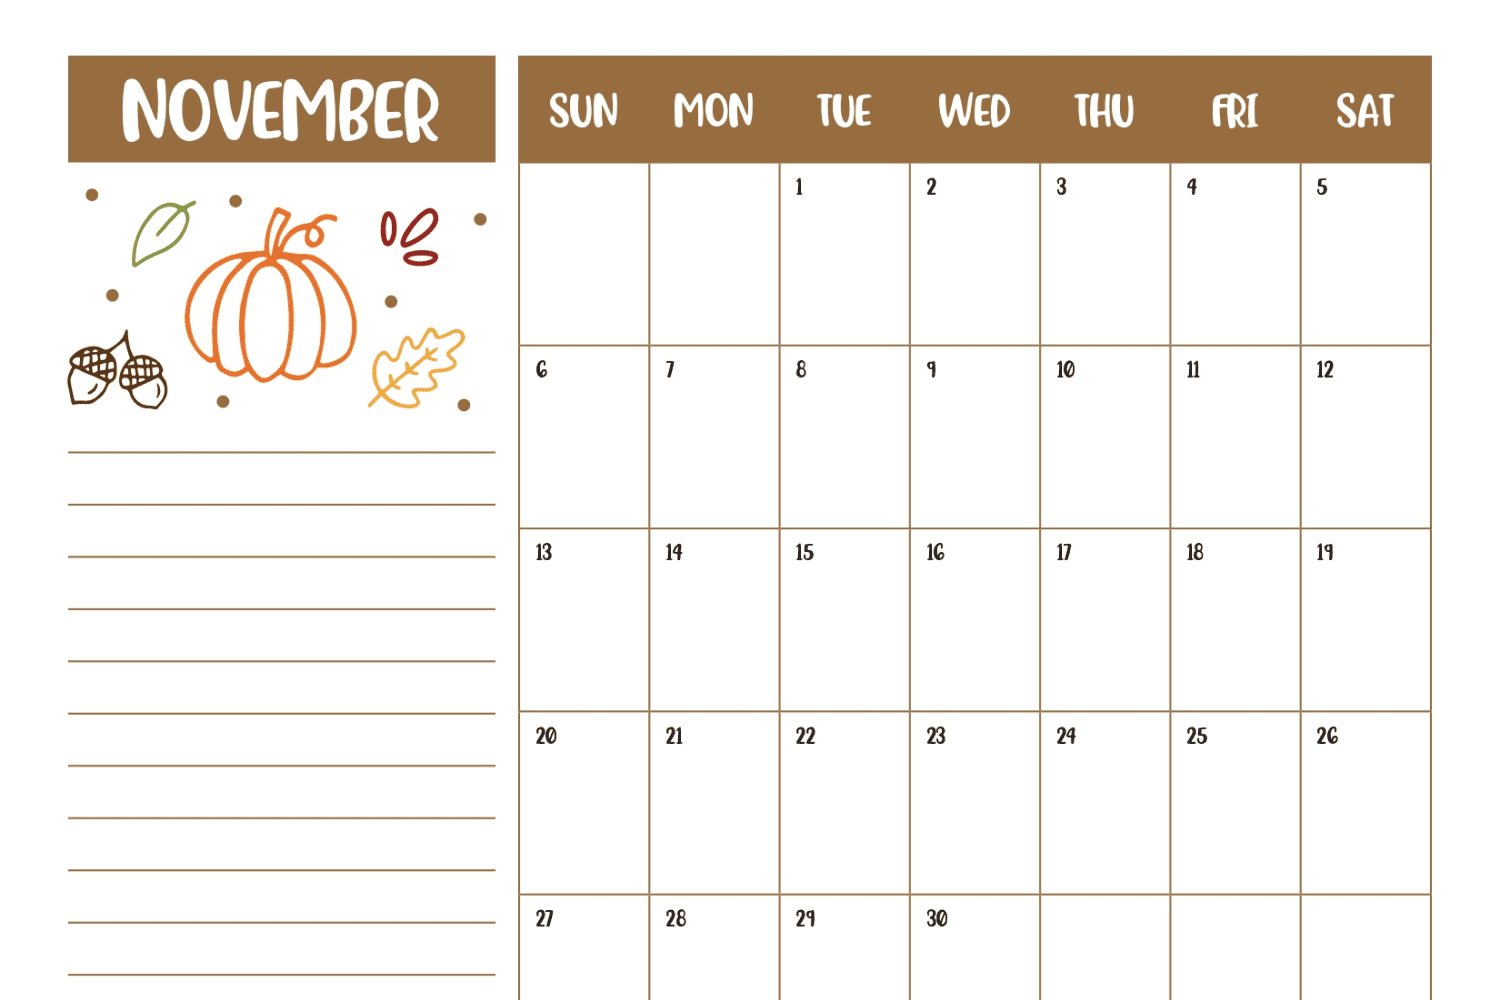 November calendar with pumpkin, leaves, acorns and space for notes.